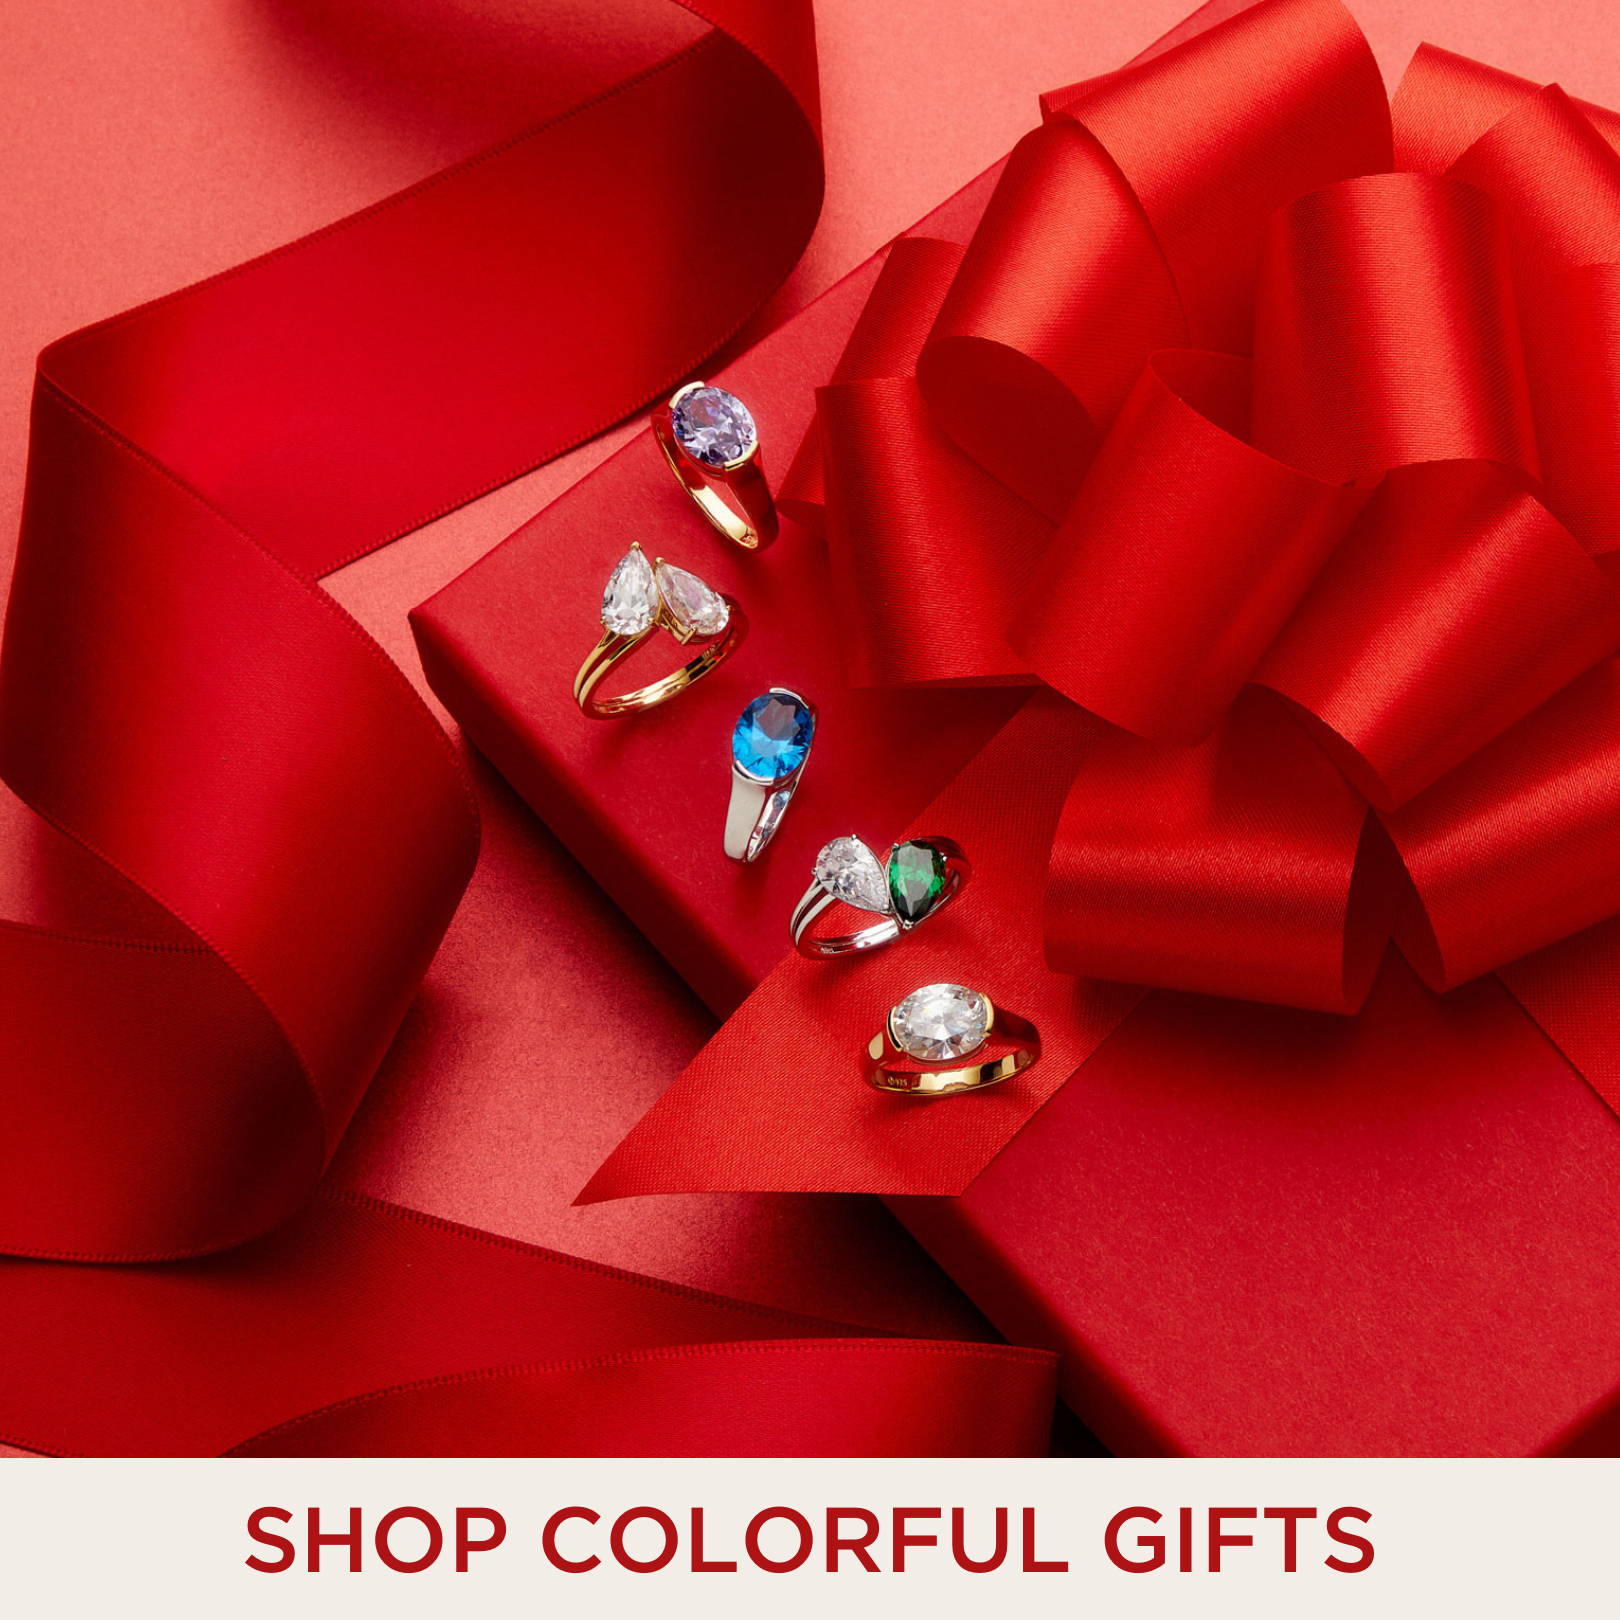 SHOP COLORFUL GIFTS. Image of cocktail rings with colorful stones on top of a present. 